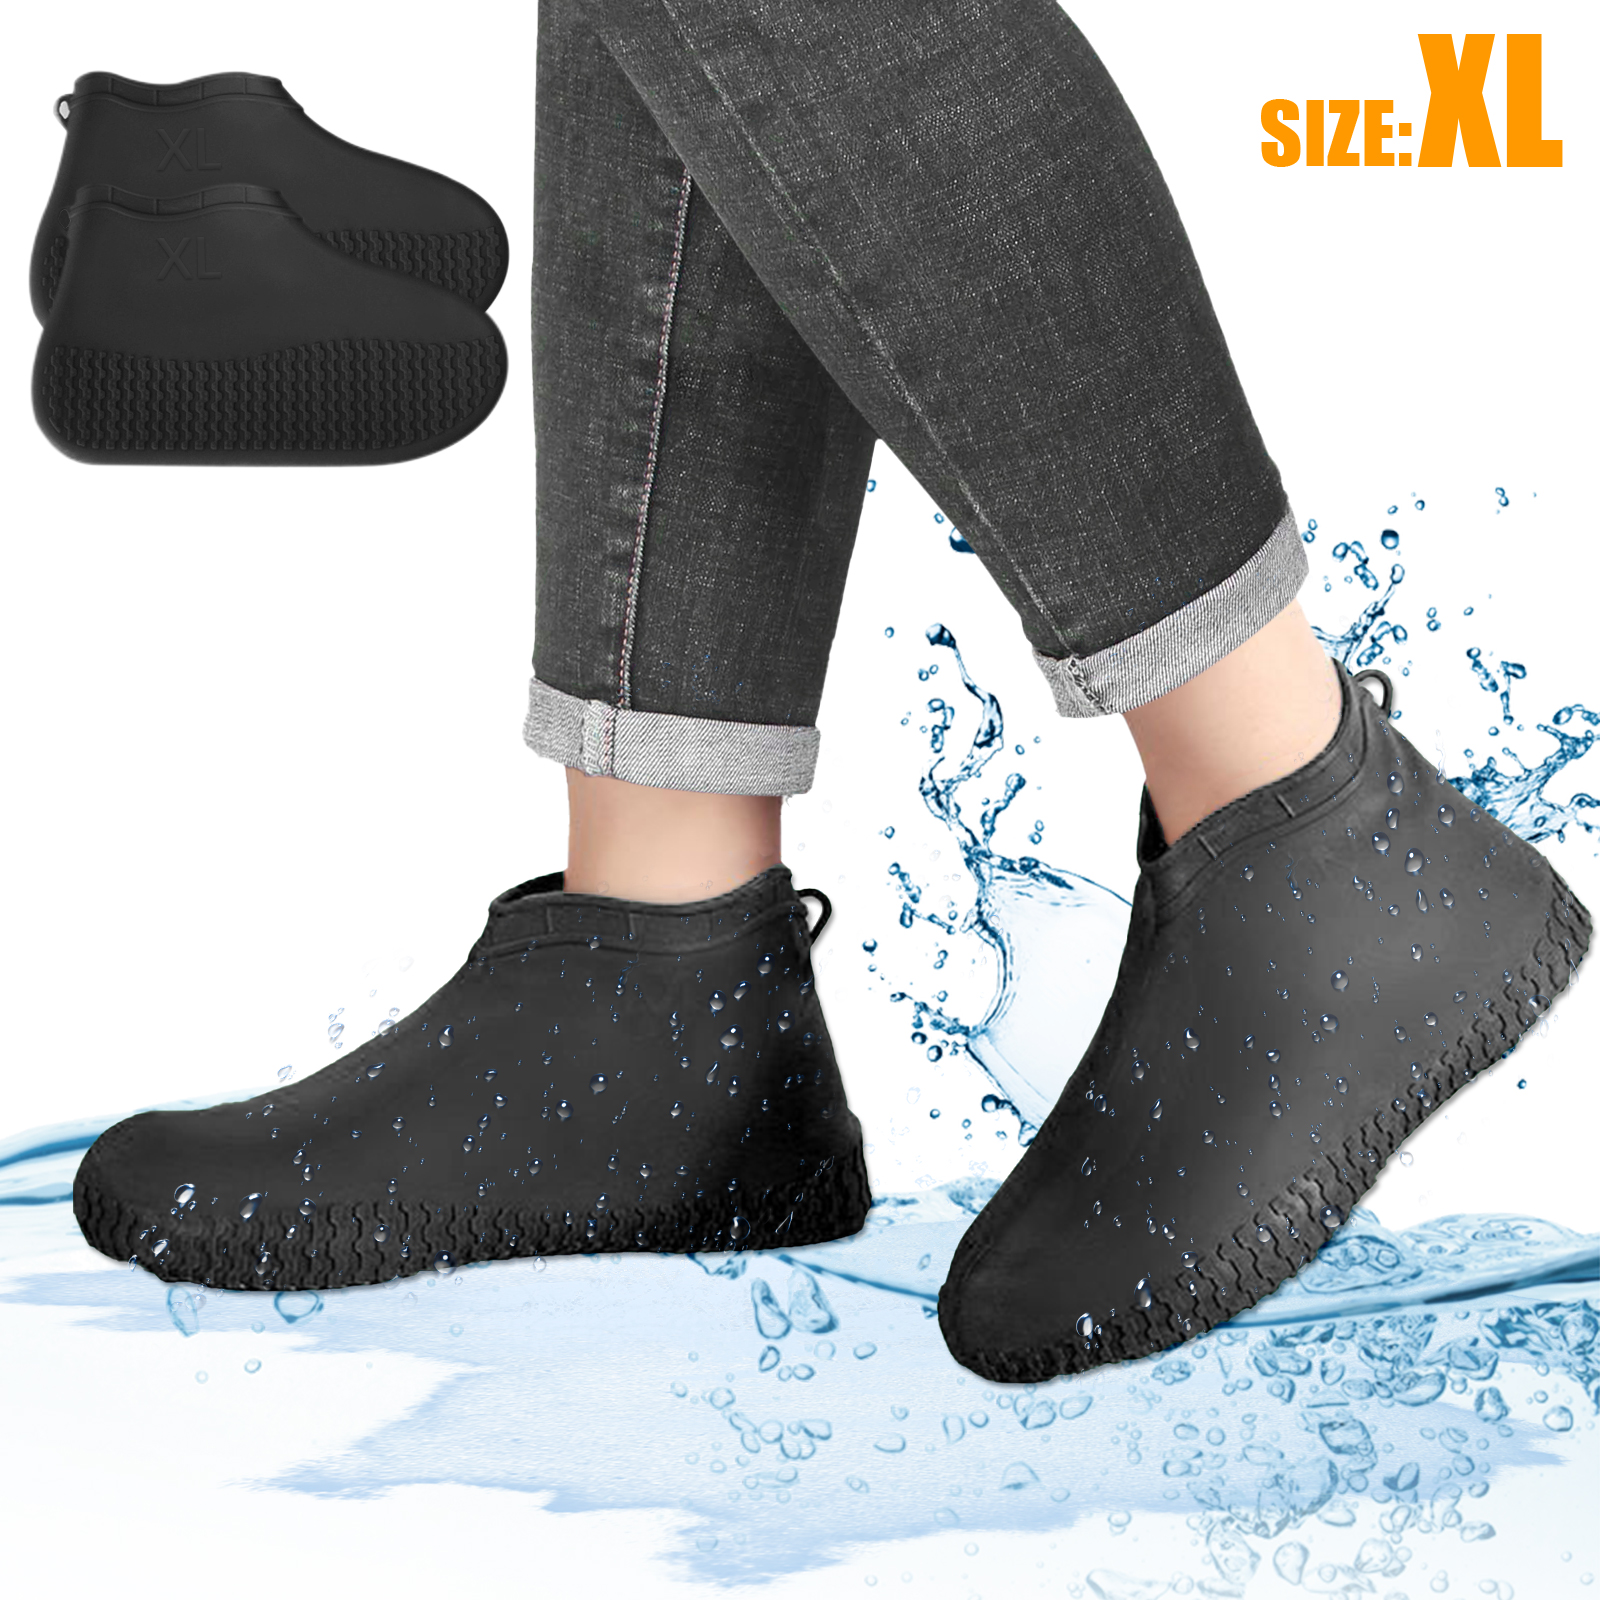 Moots Rain and Snow Weather Shoecover Slip-resistant Overshoes Waterproof Rubber Boots 